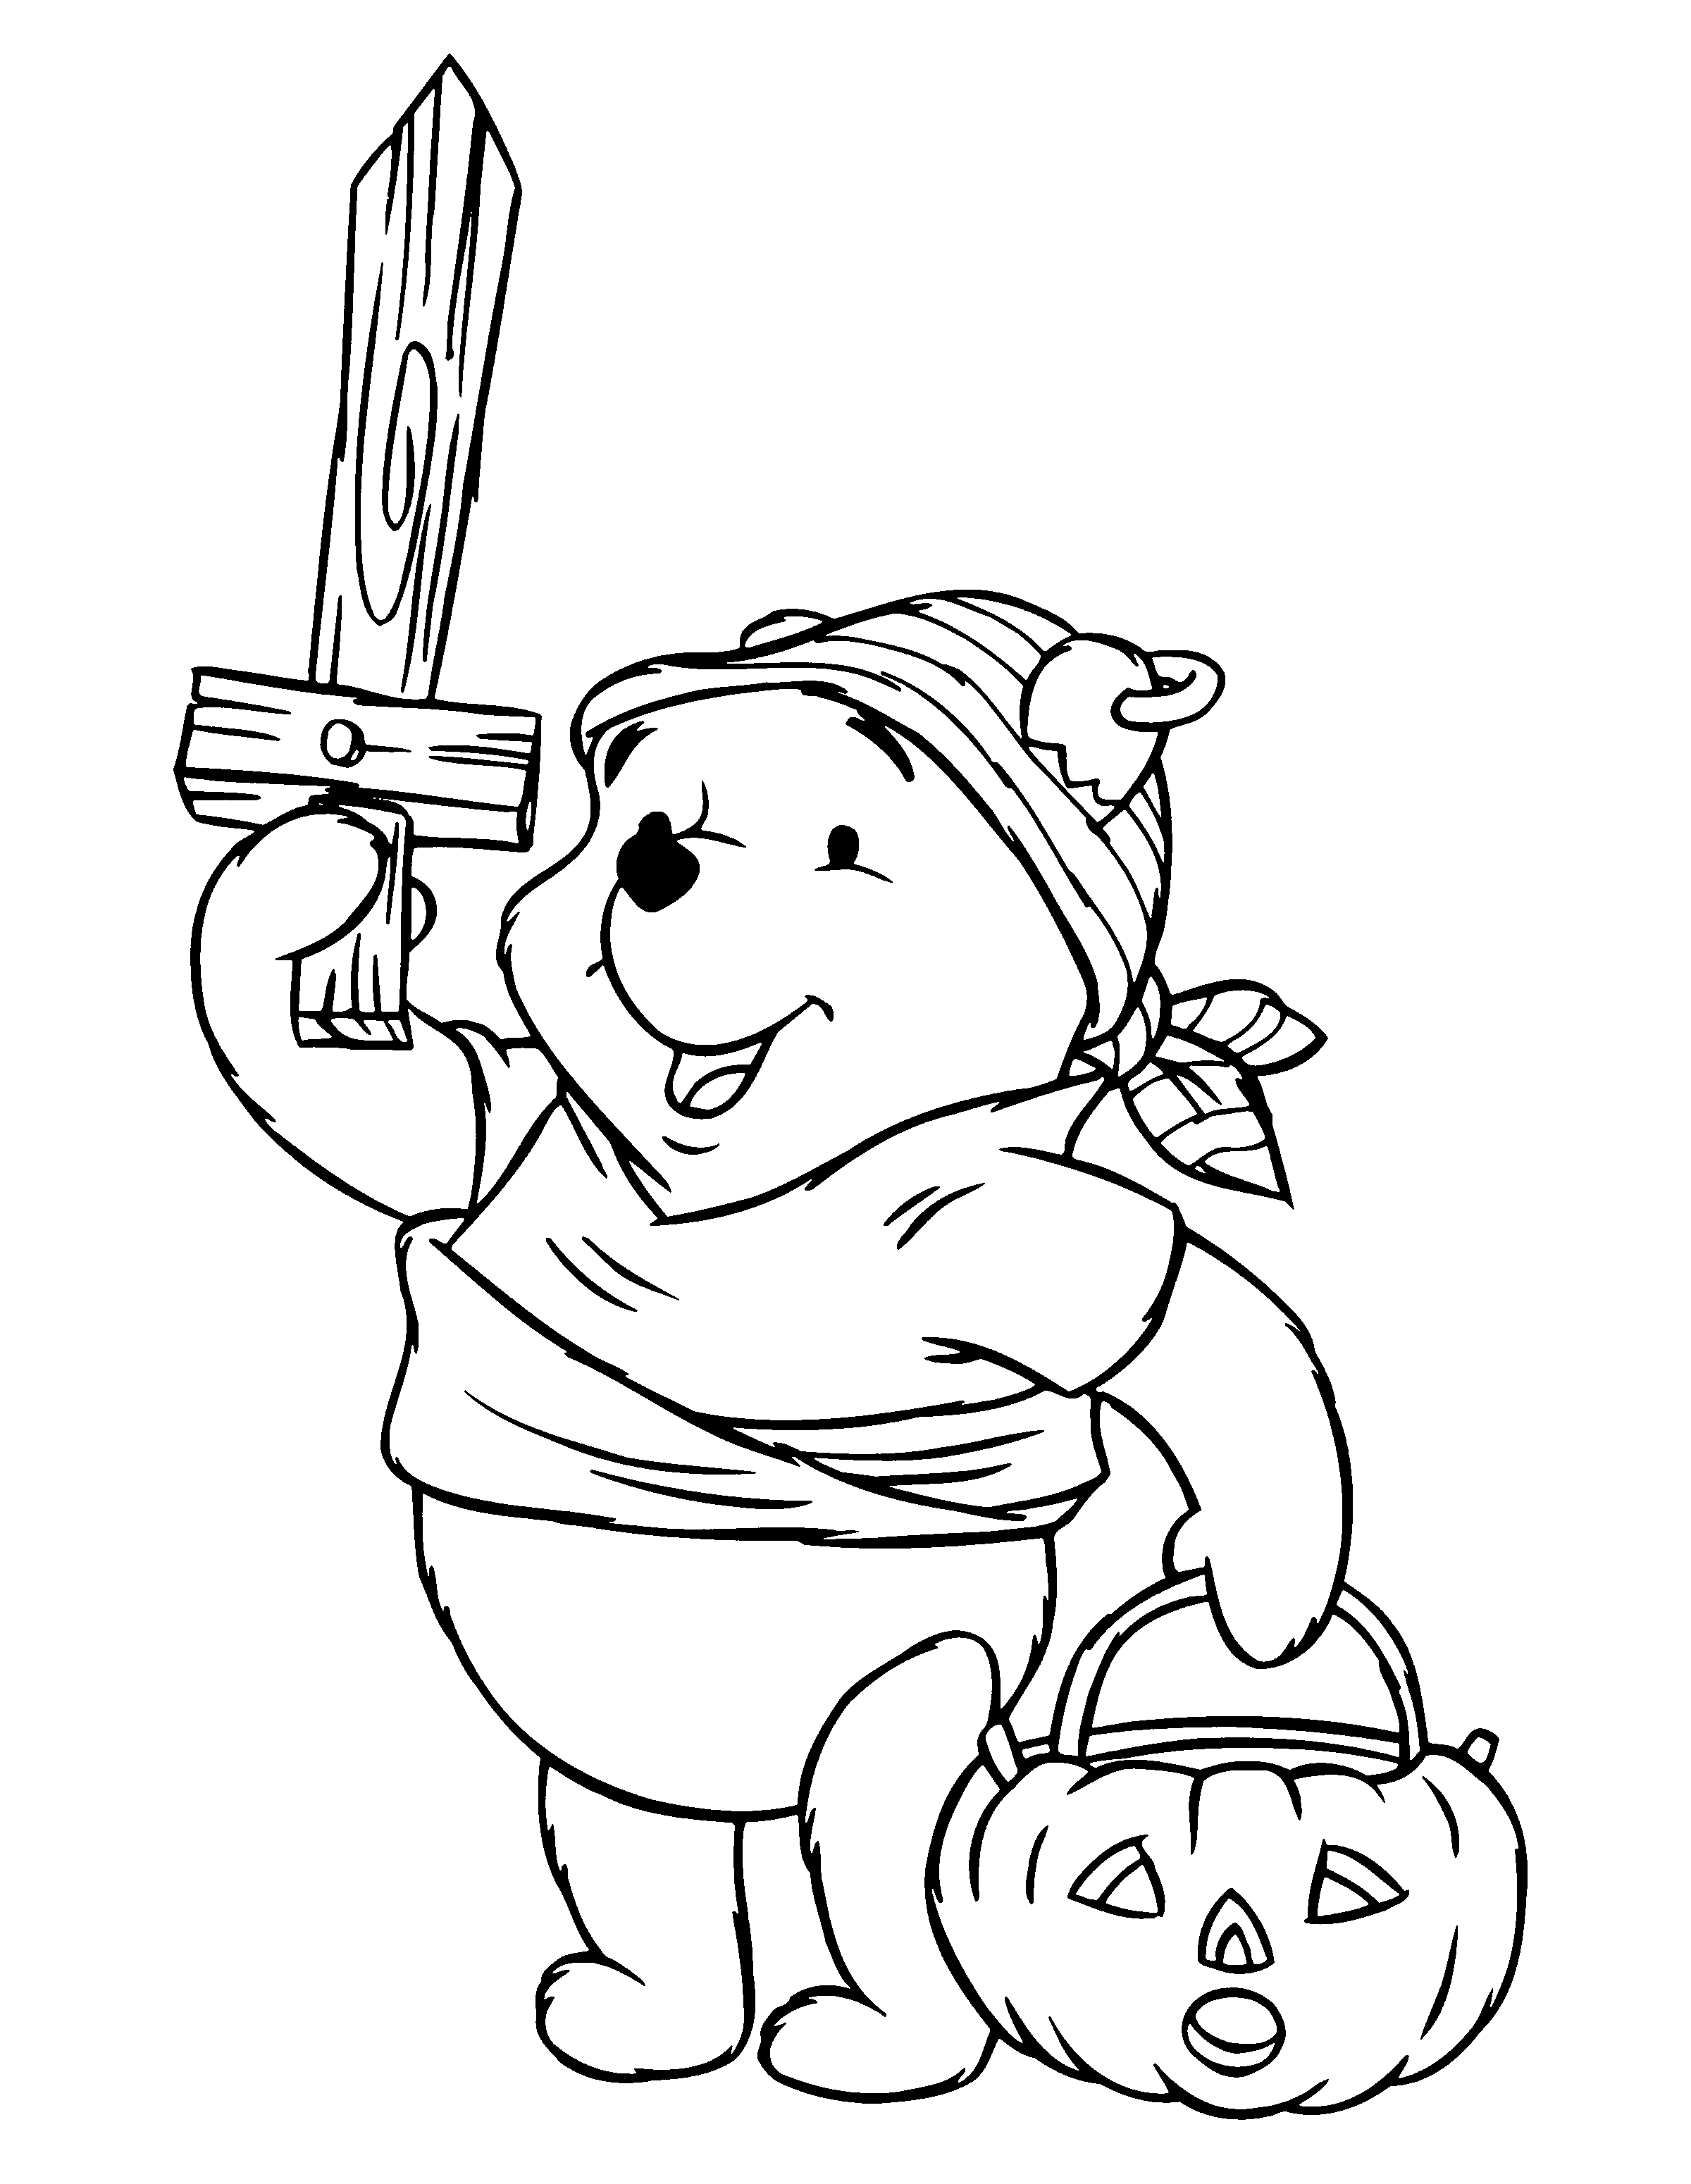 animated-coloring-pages-winnie-the-pooh-image-0063